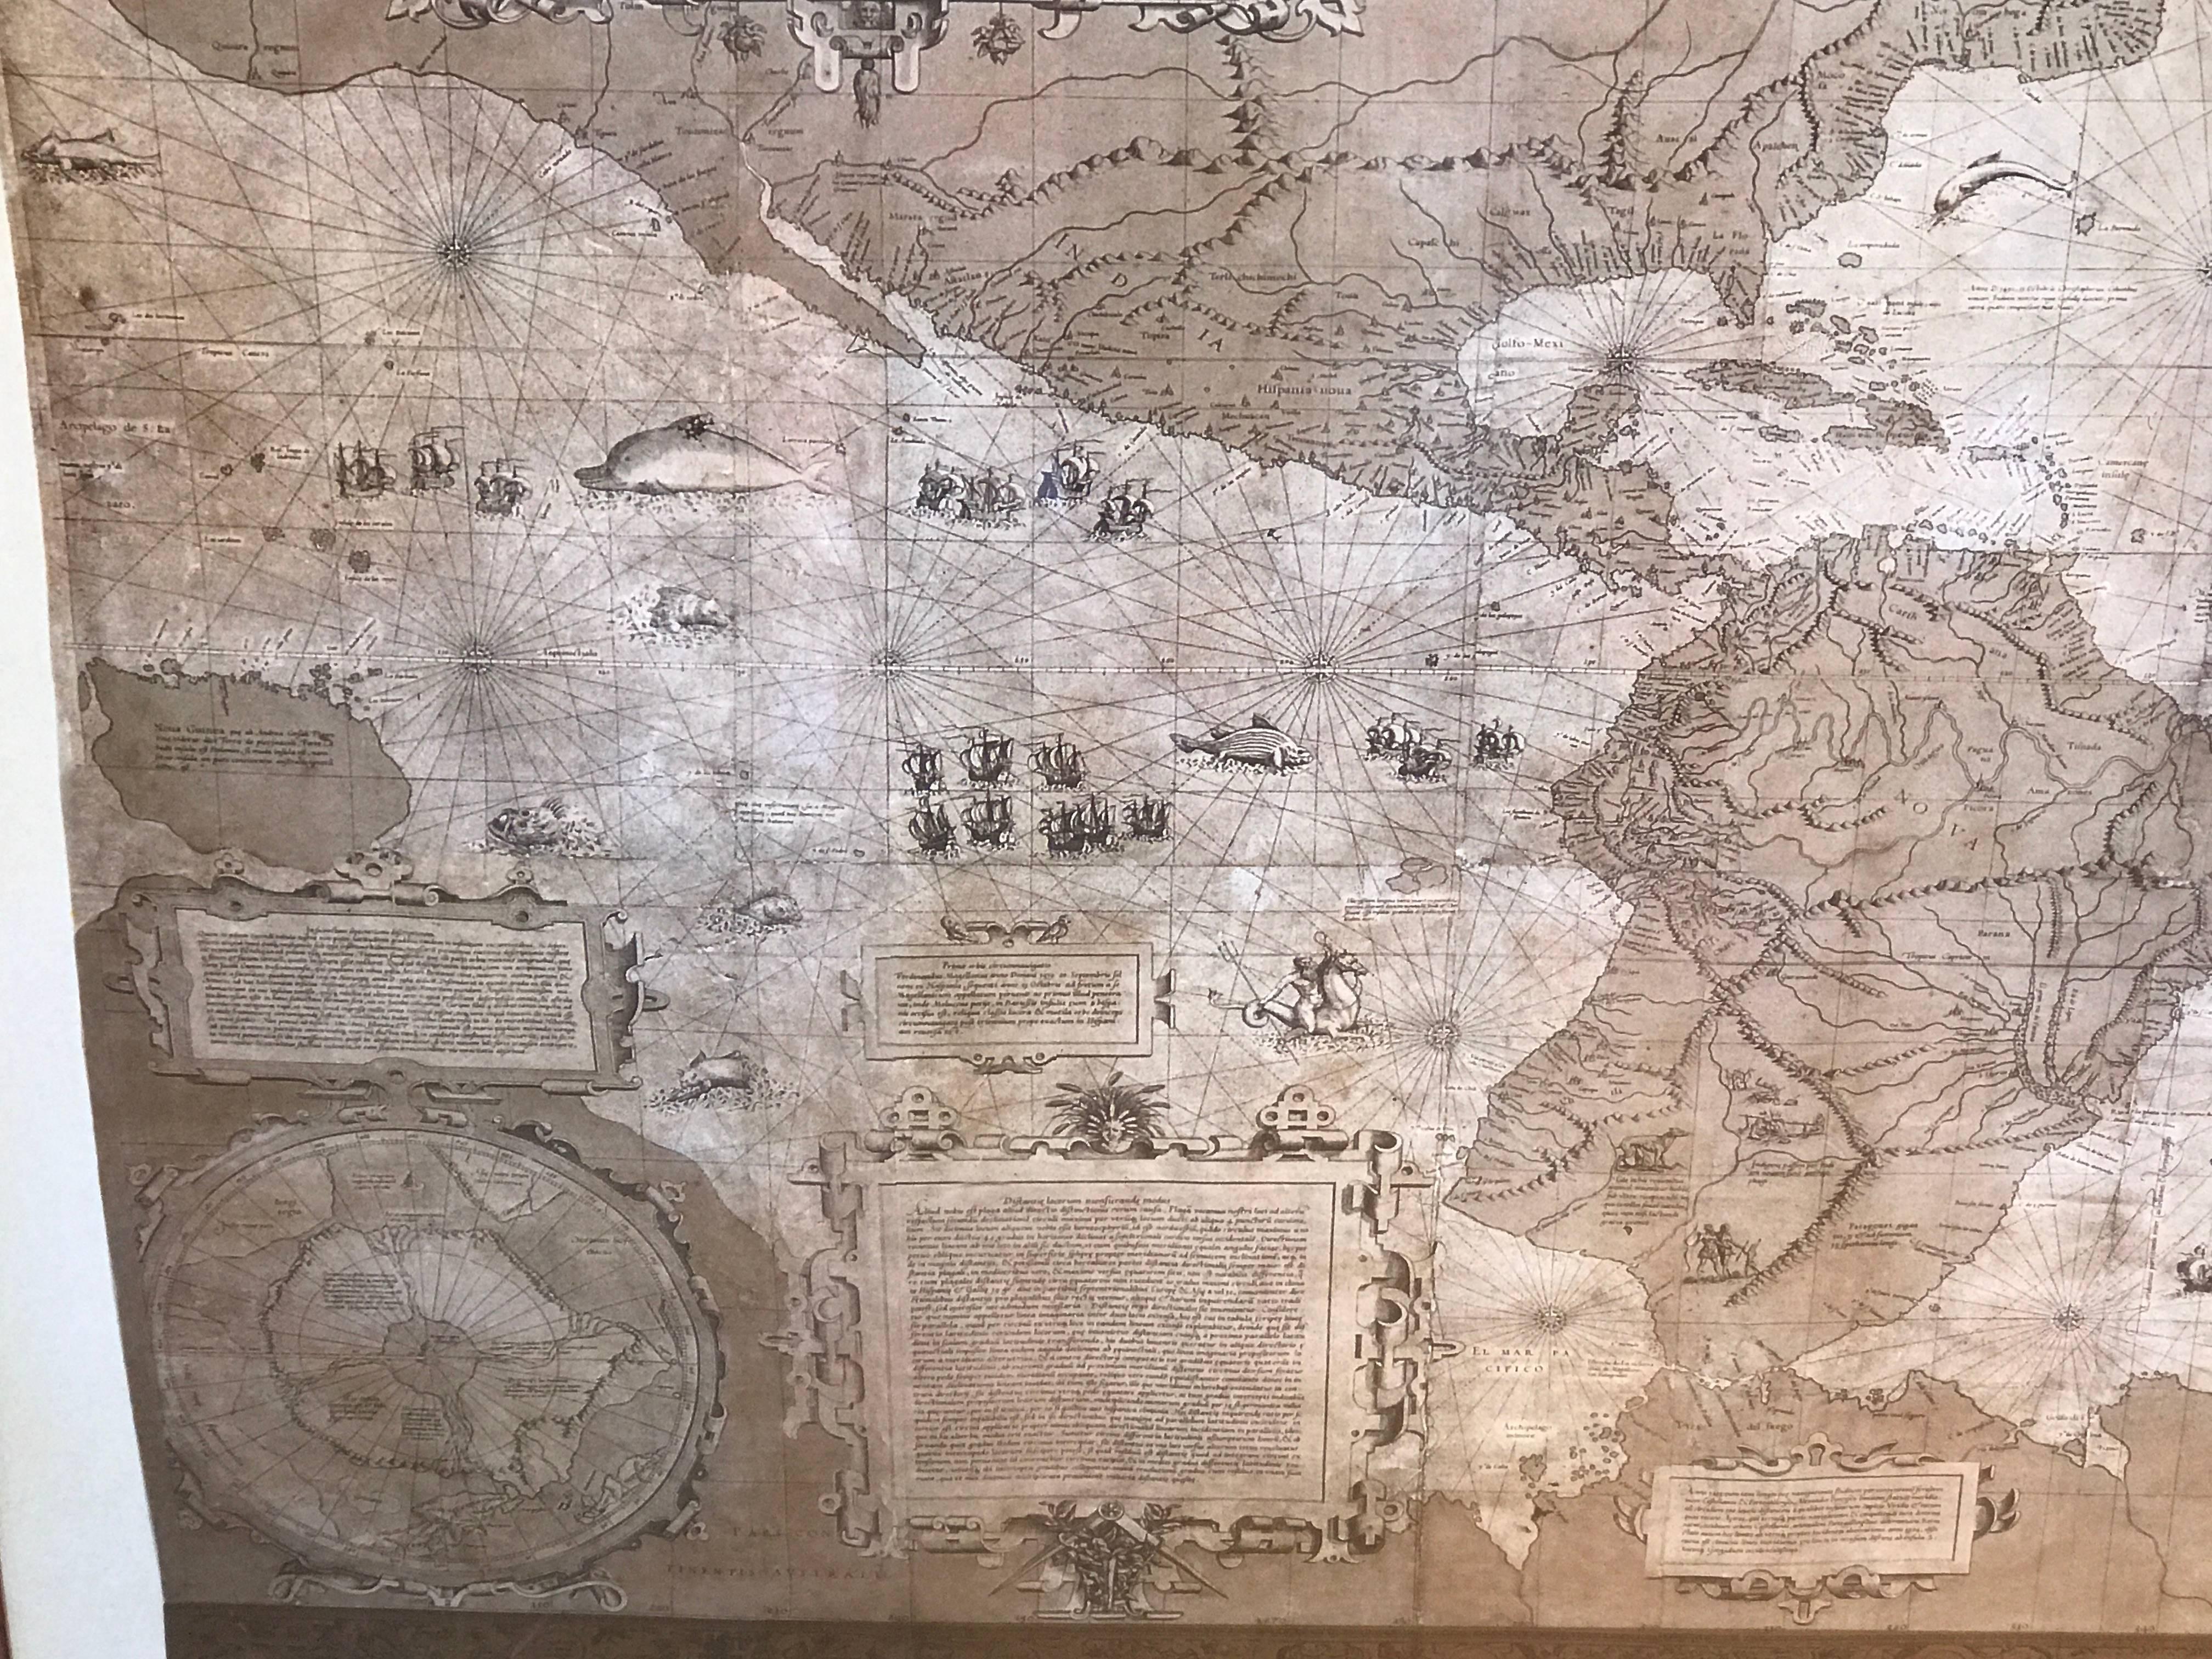 Renaissance Large-Scale Map of the World After Mercator, 1569, 20th Century Printing